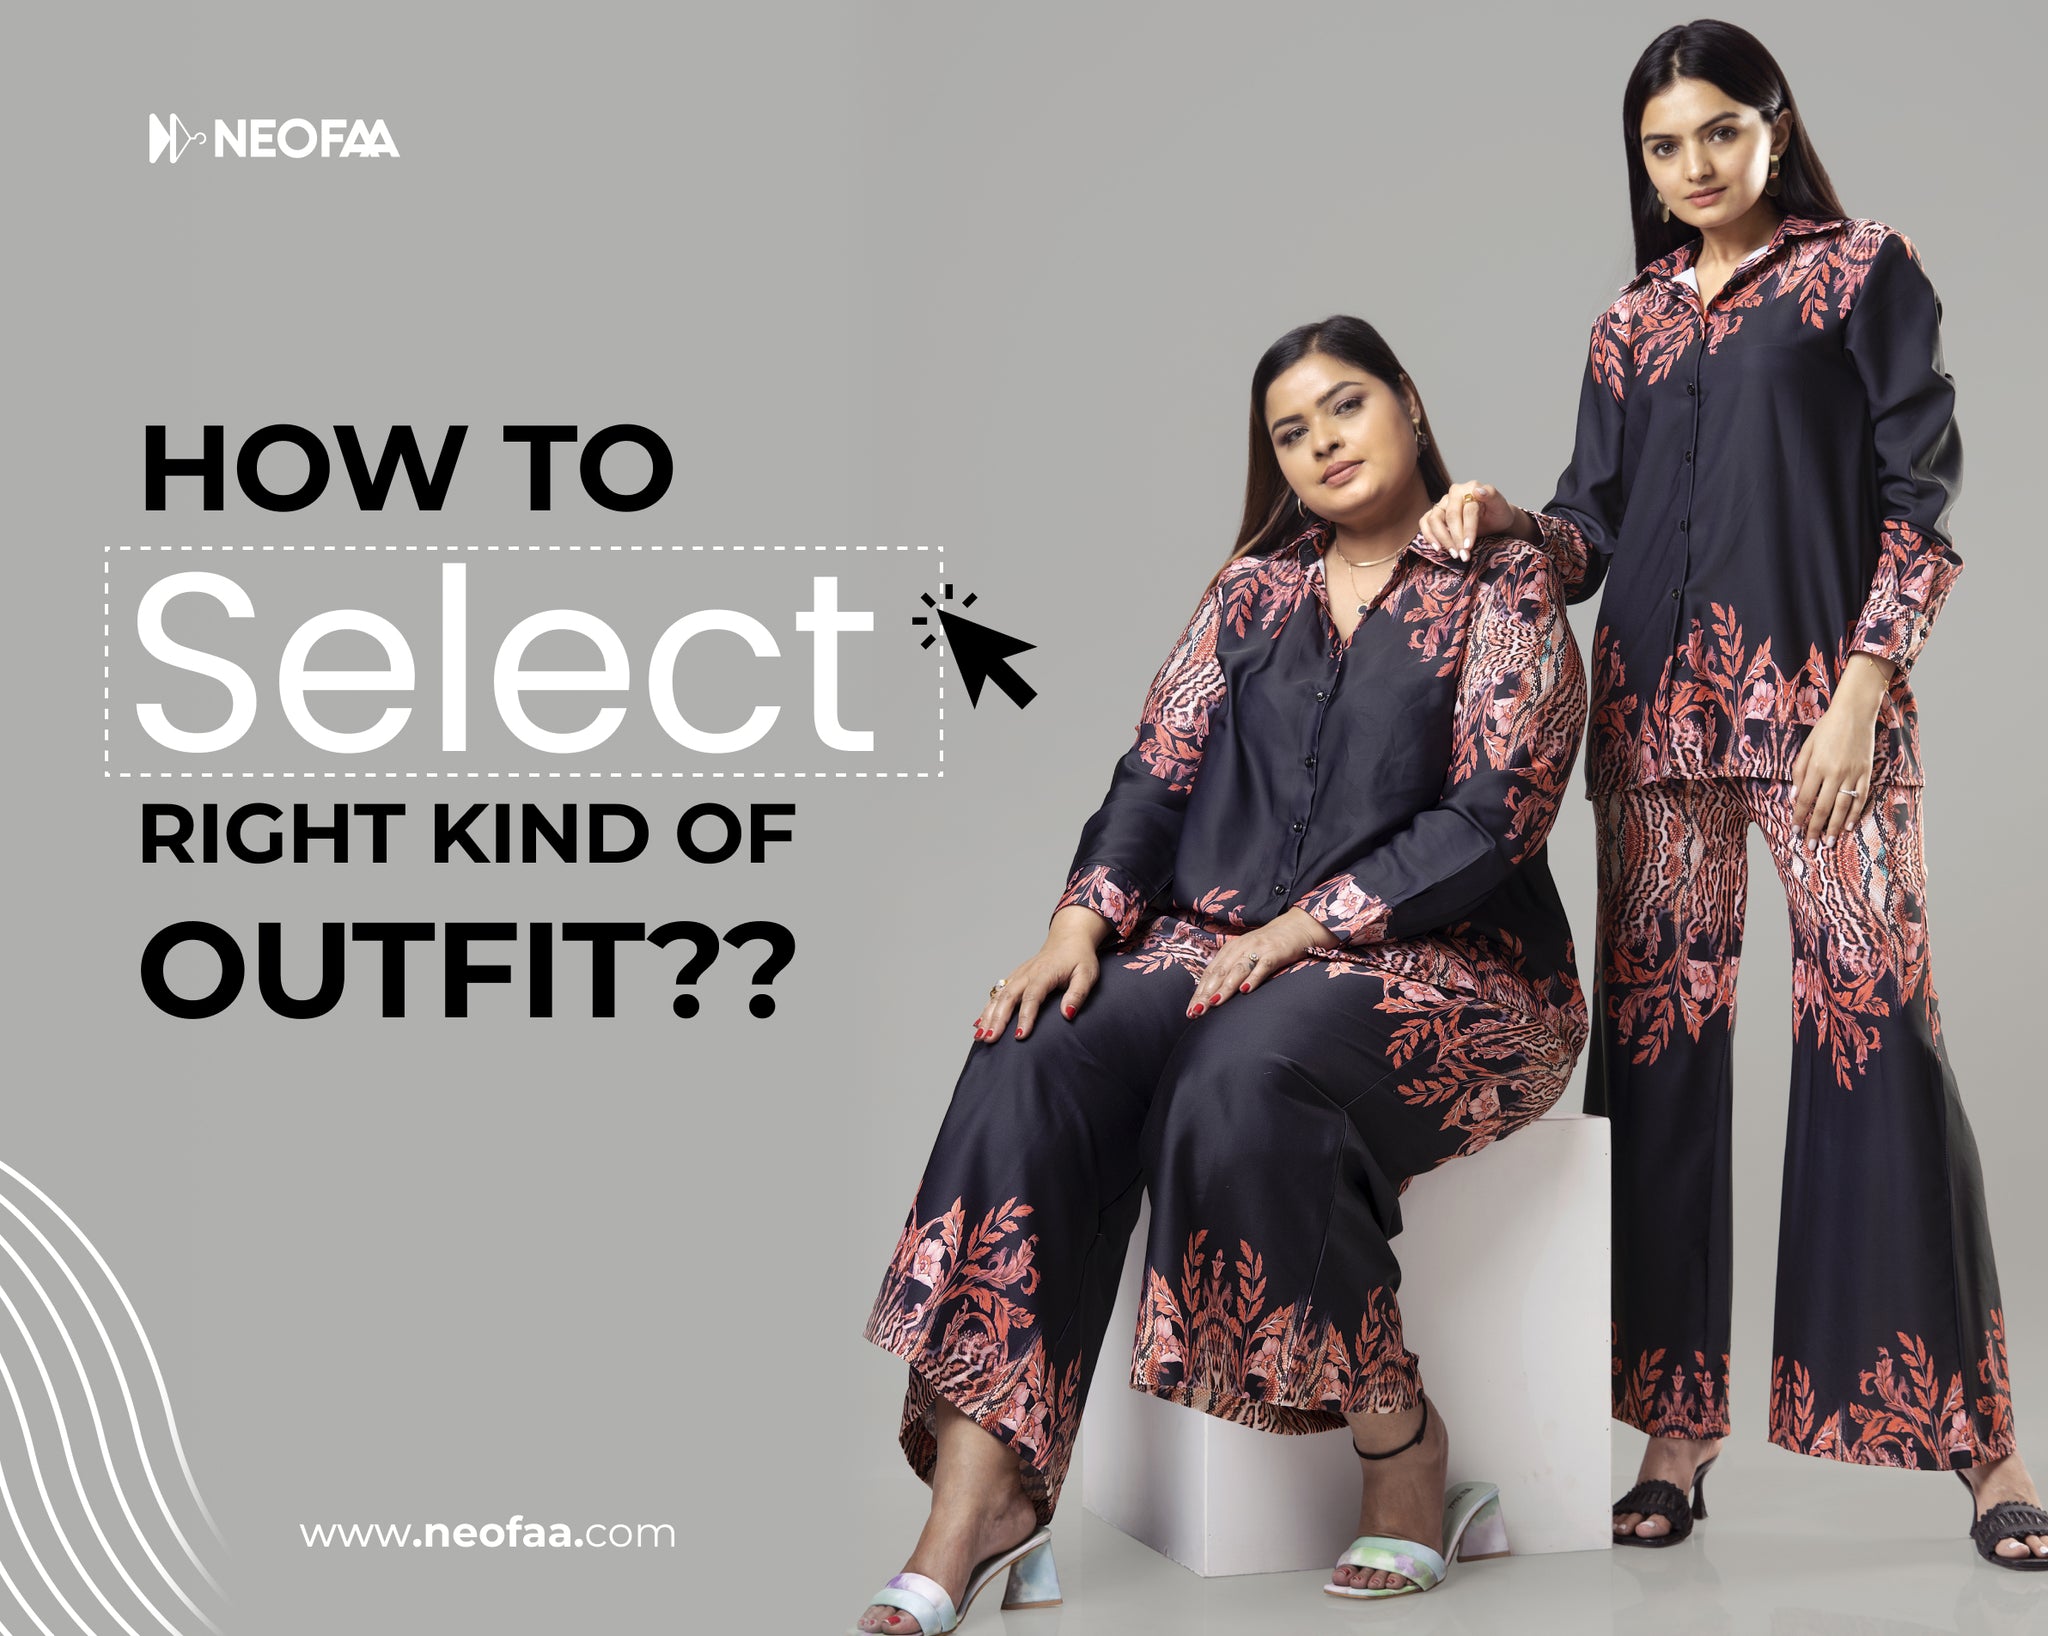 How to select the right kind of outfit?